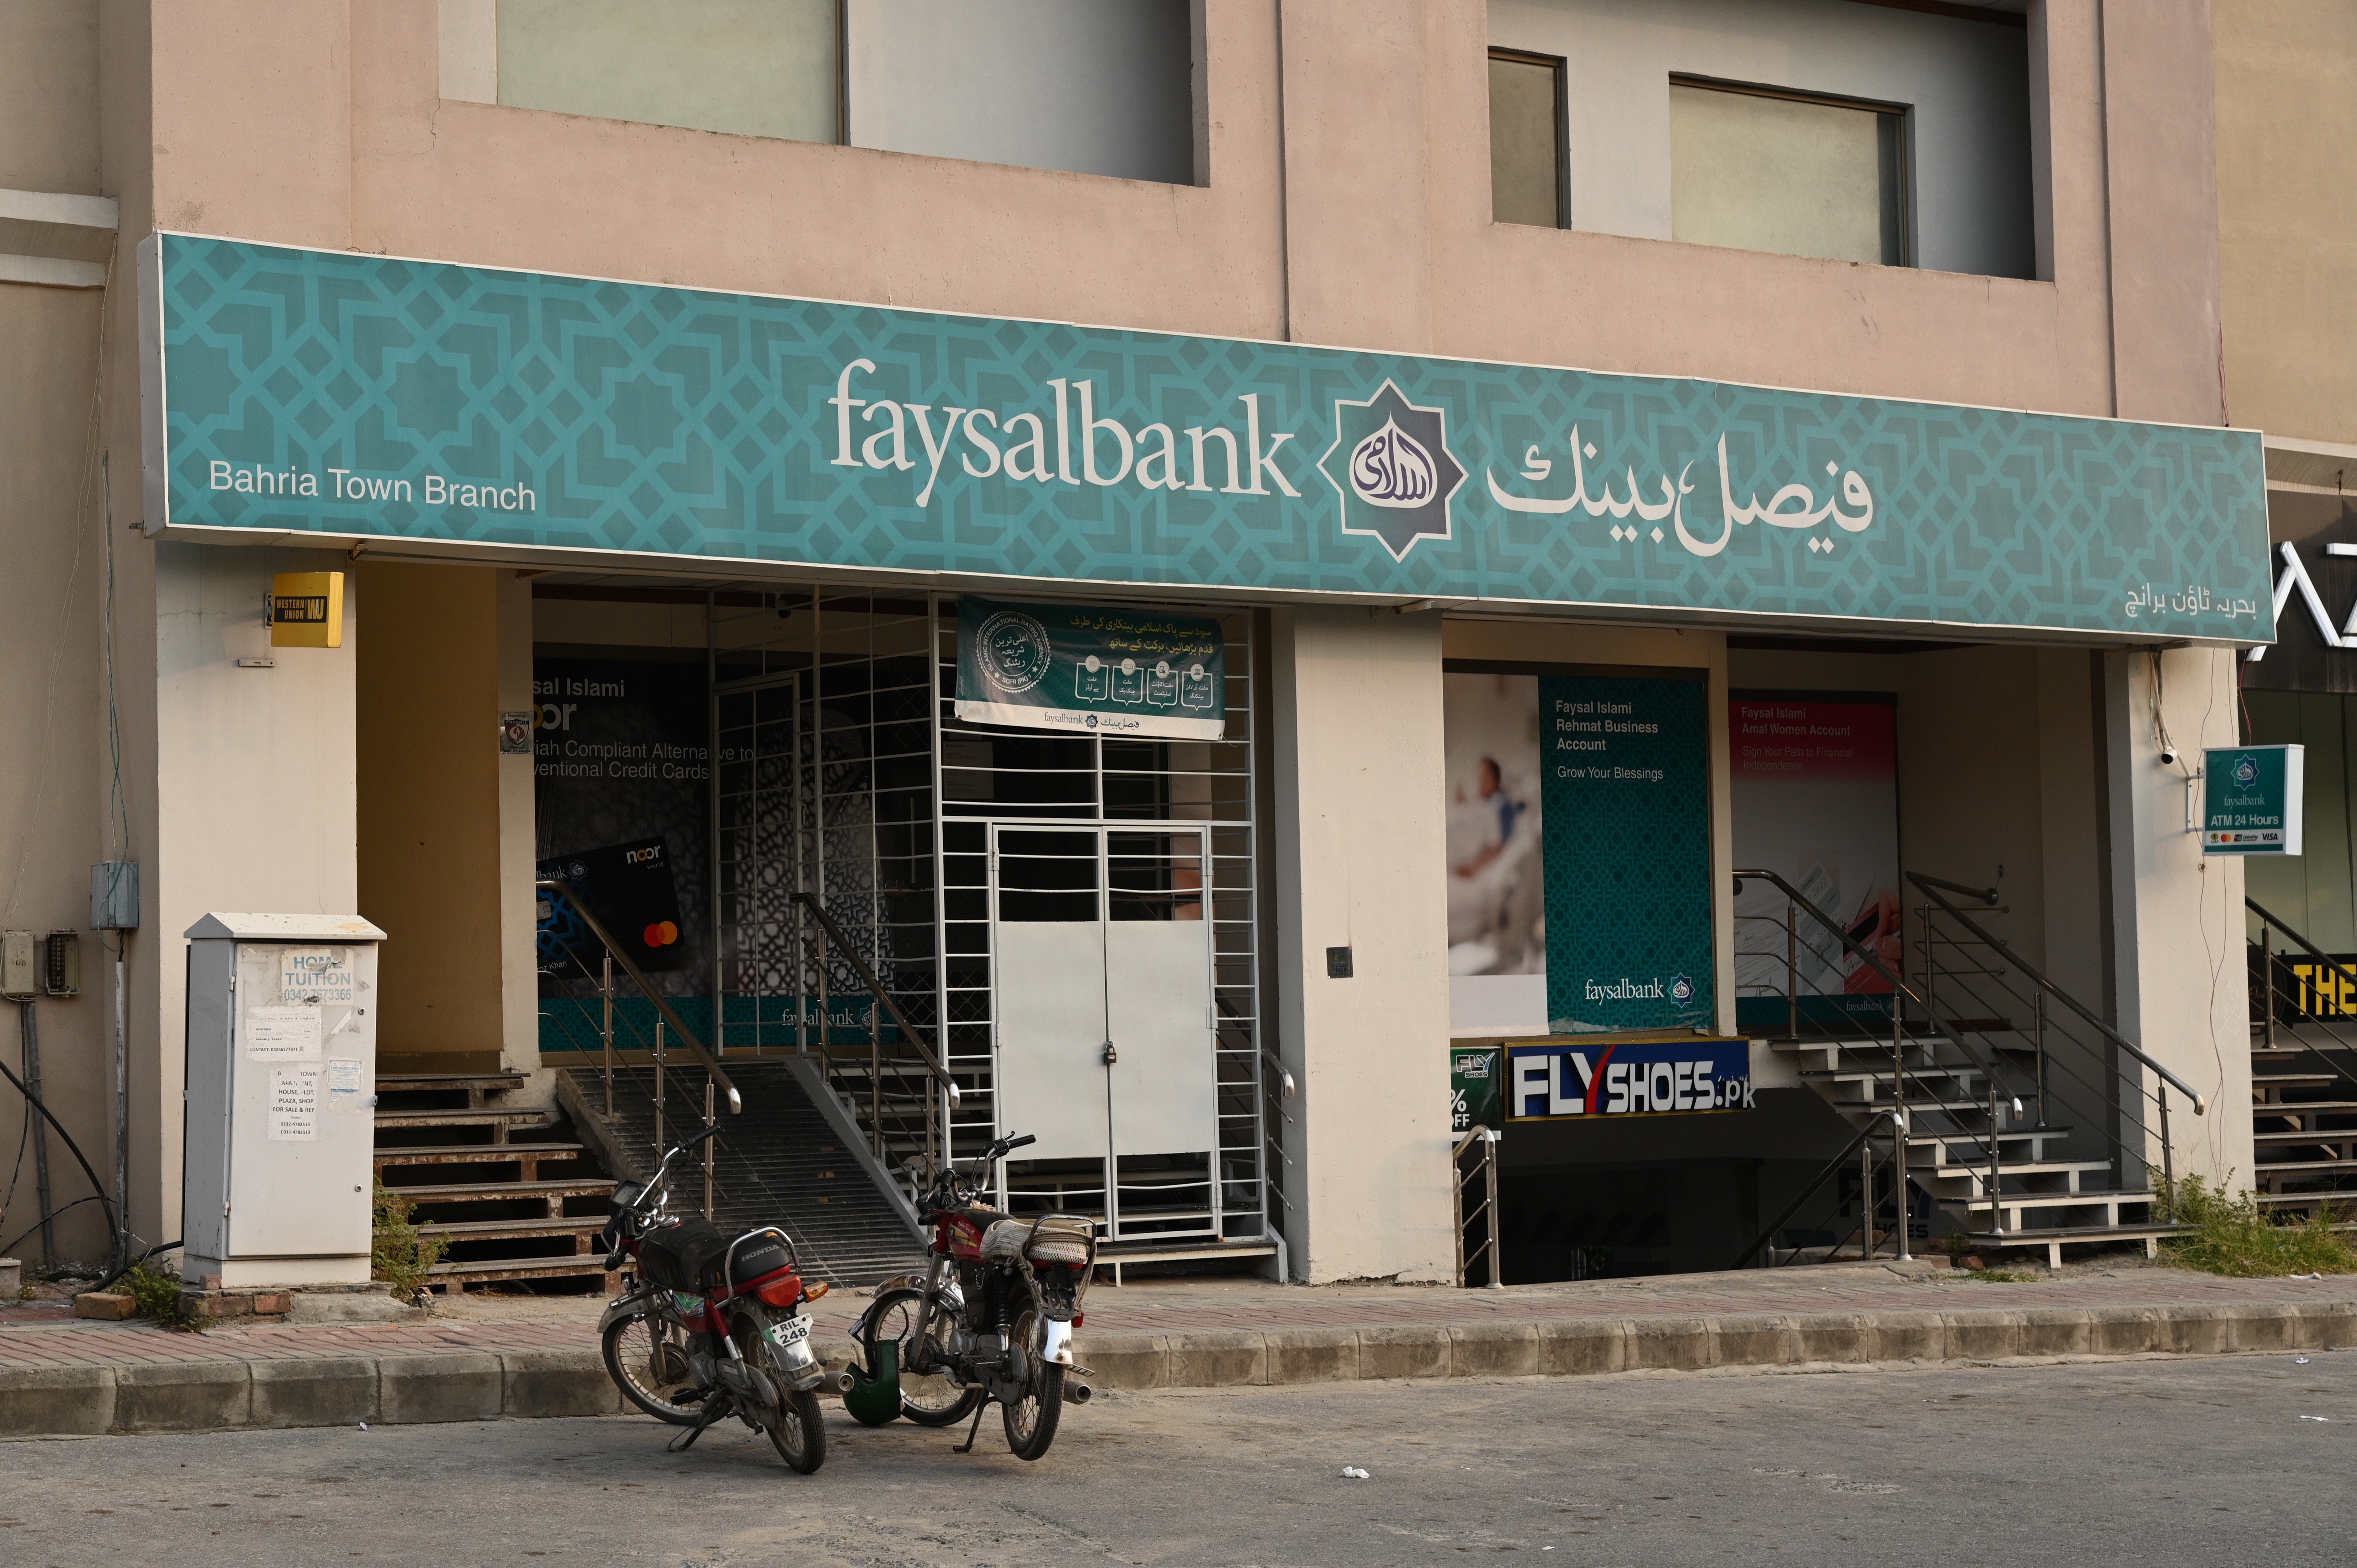 The Faysal Bank of Pakistan, Bahria Town Branch